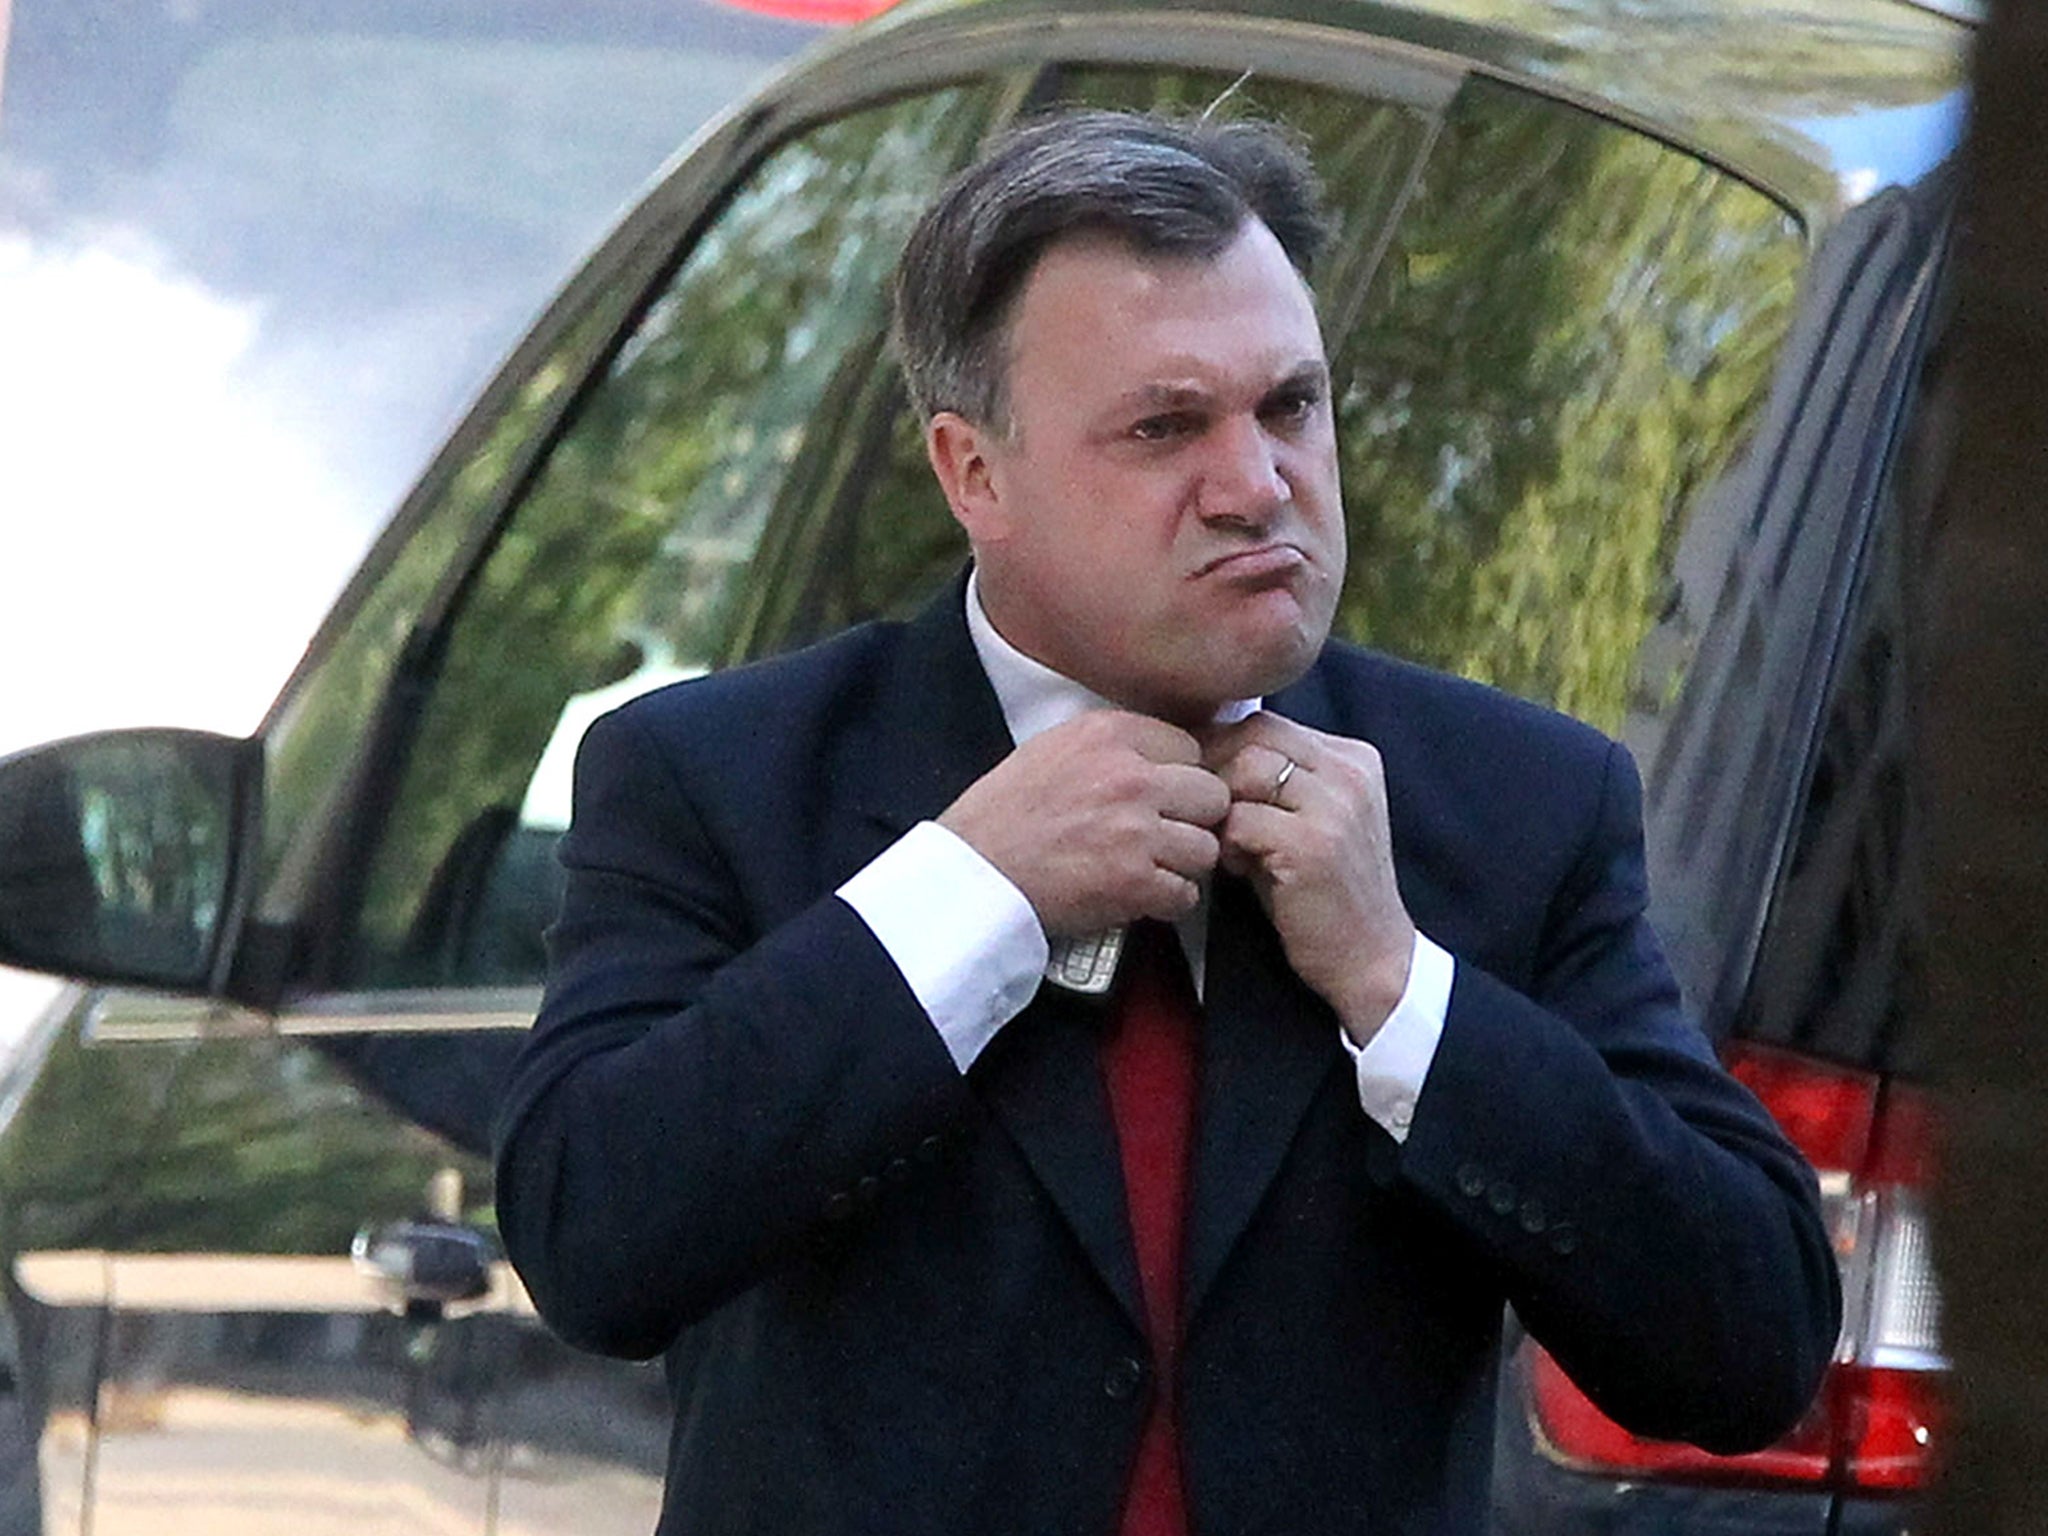 Shadow Chancellor Ed Balls lost his seat in Morley and Outwood